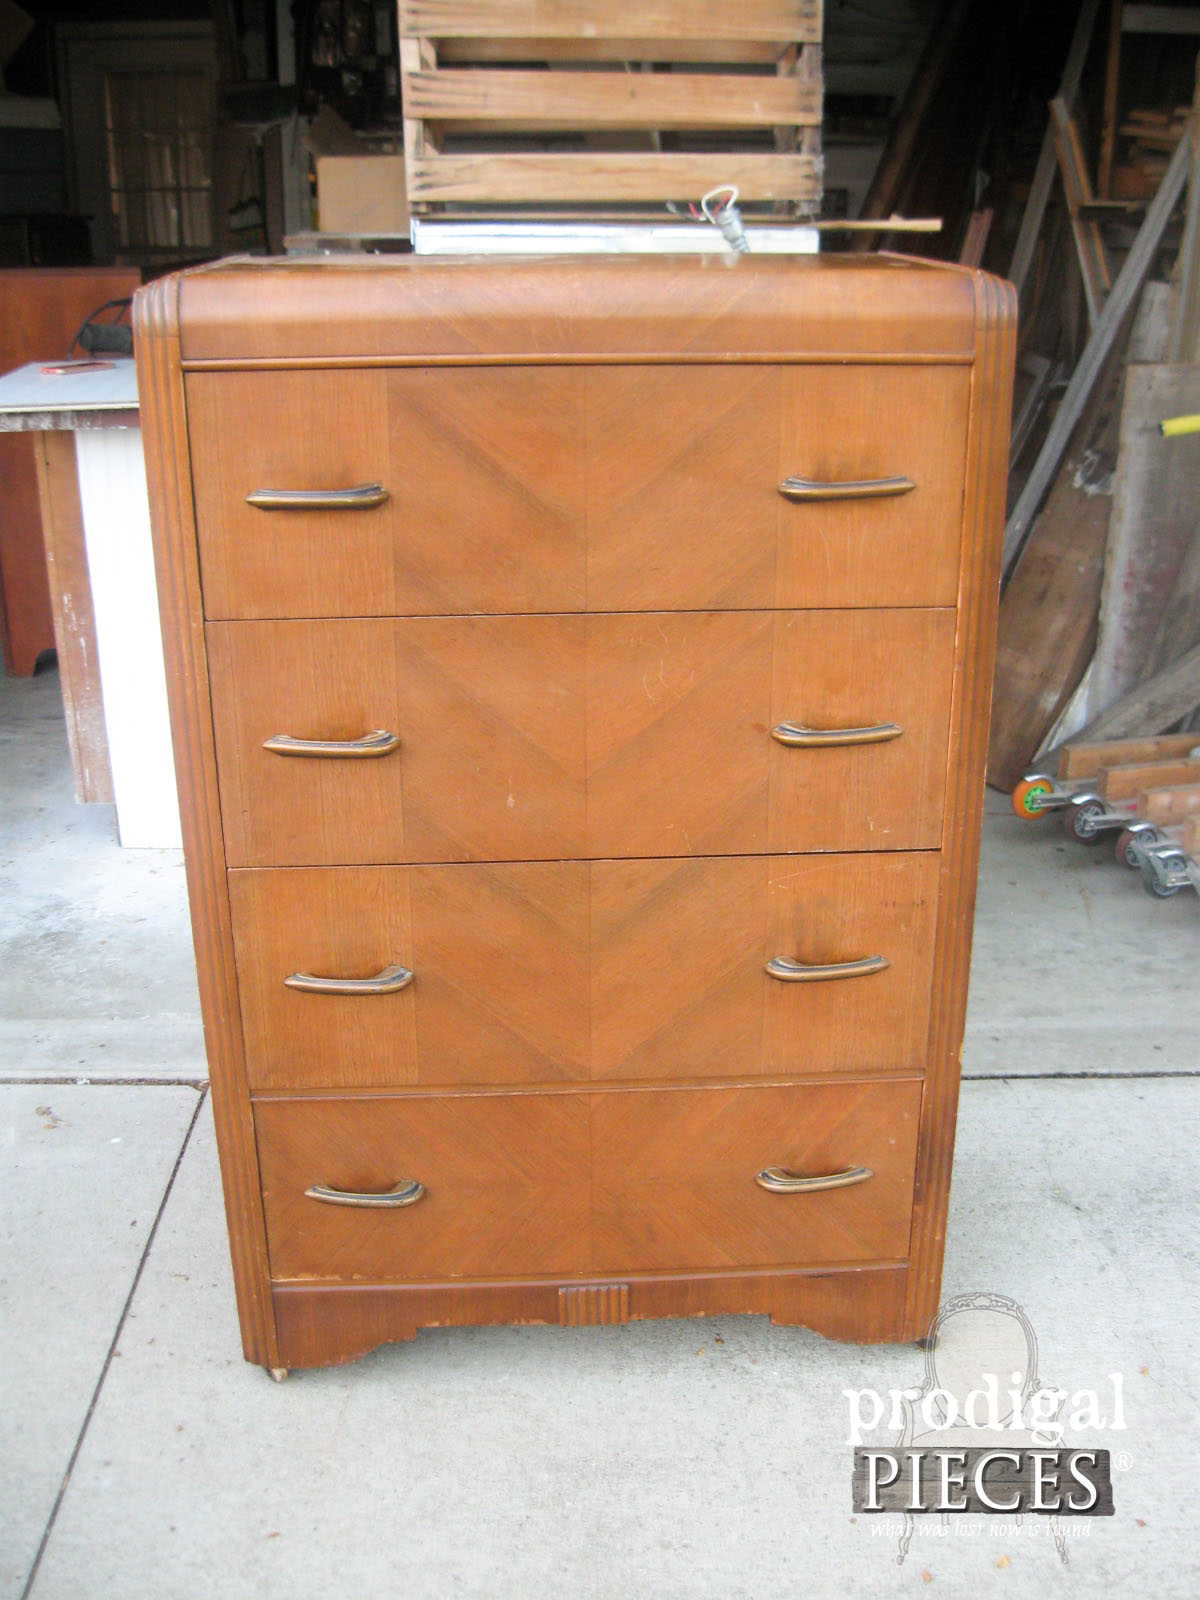 Art Deco Chest of Drawers Before Shabby Chic Details | Prodigal Pieces | www.prodigalpieces.com